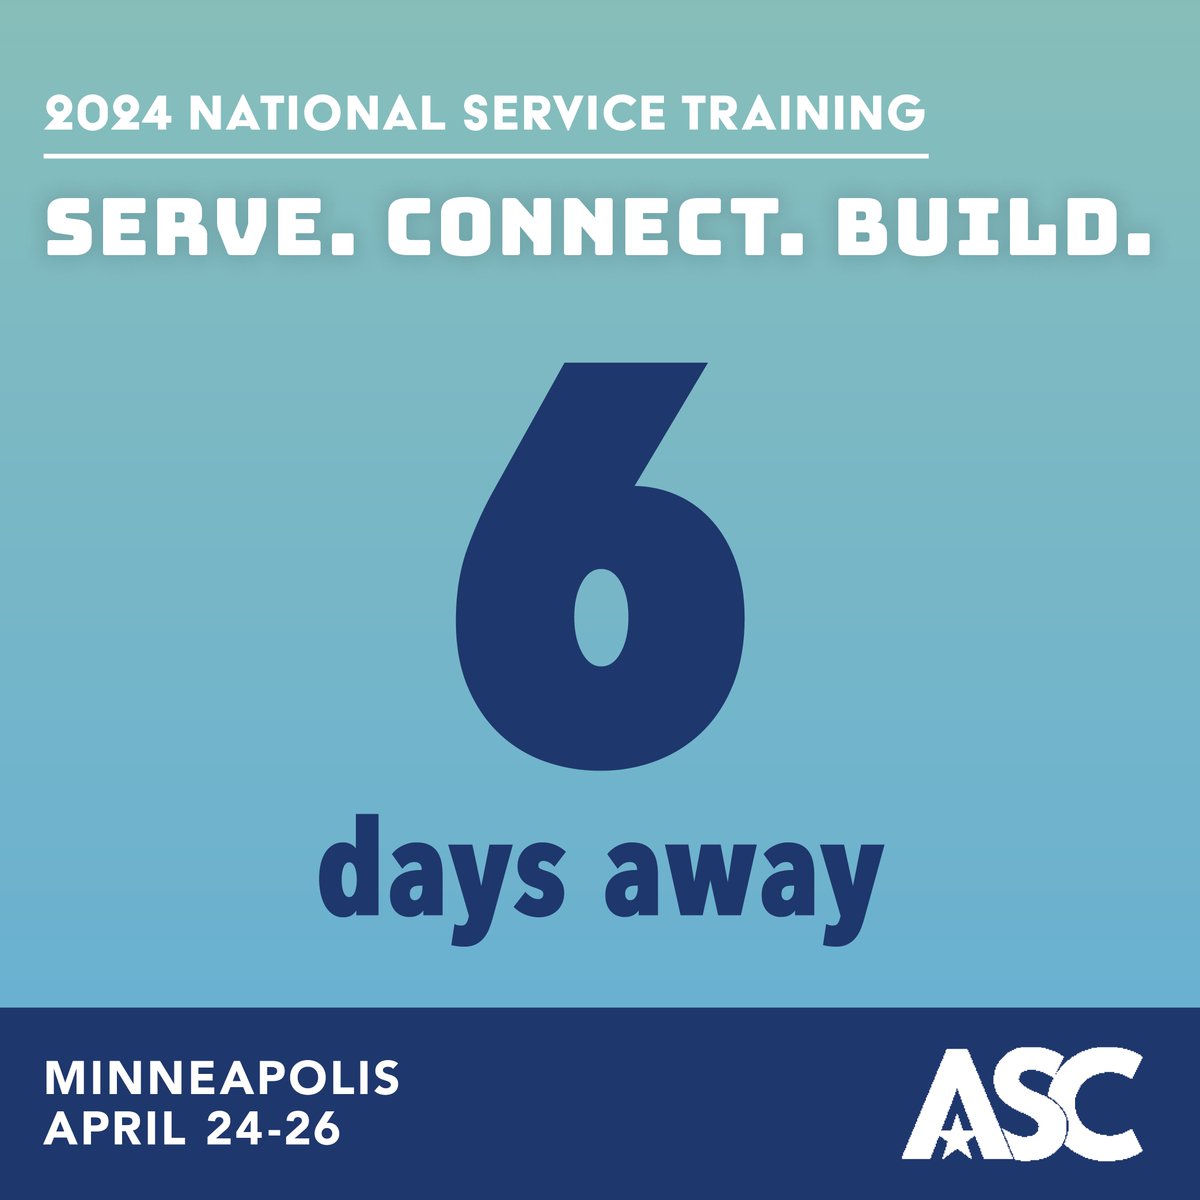 We kick off #NationalServiceTraining in #Minneapolis in just one week! We're thrilled to have three plenary sessions, seven workshop blocks with a total of 94 workshops offered, more than 130 presenters, and several networking opportunities. See you there!